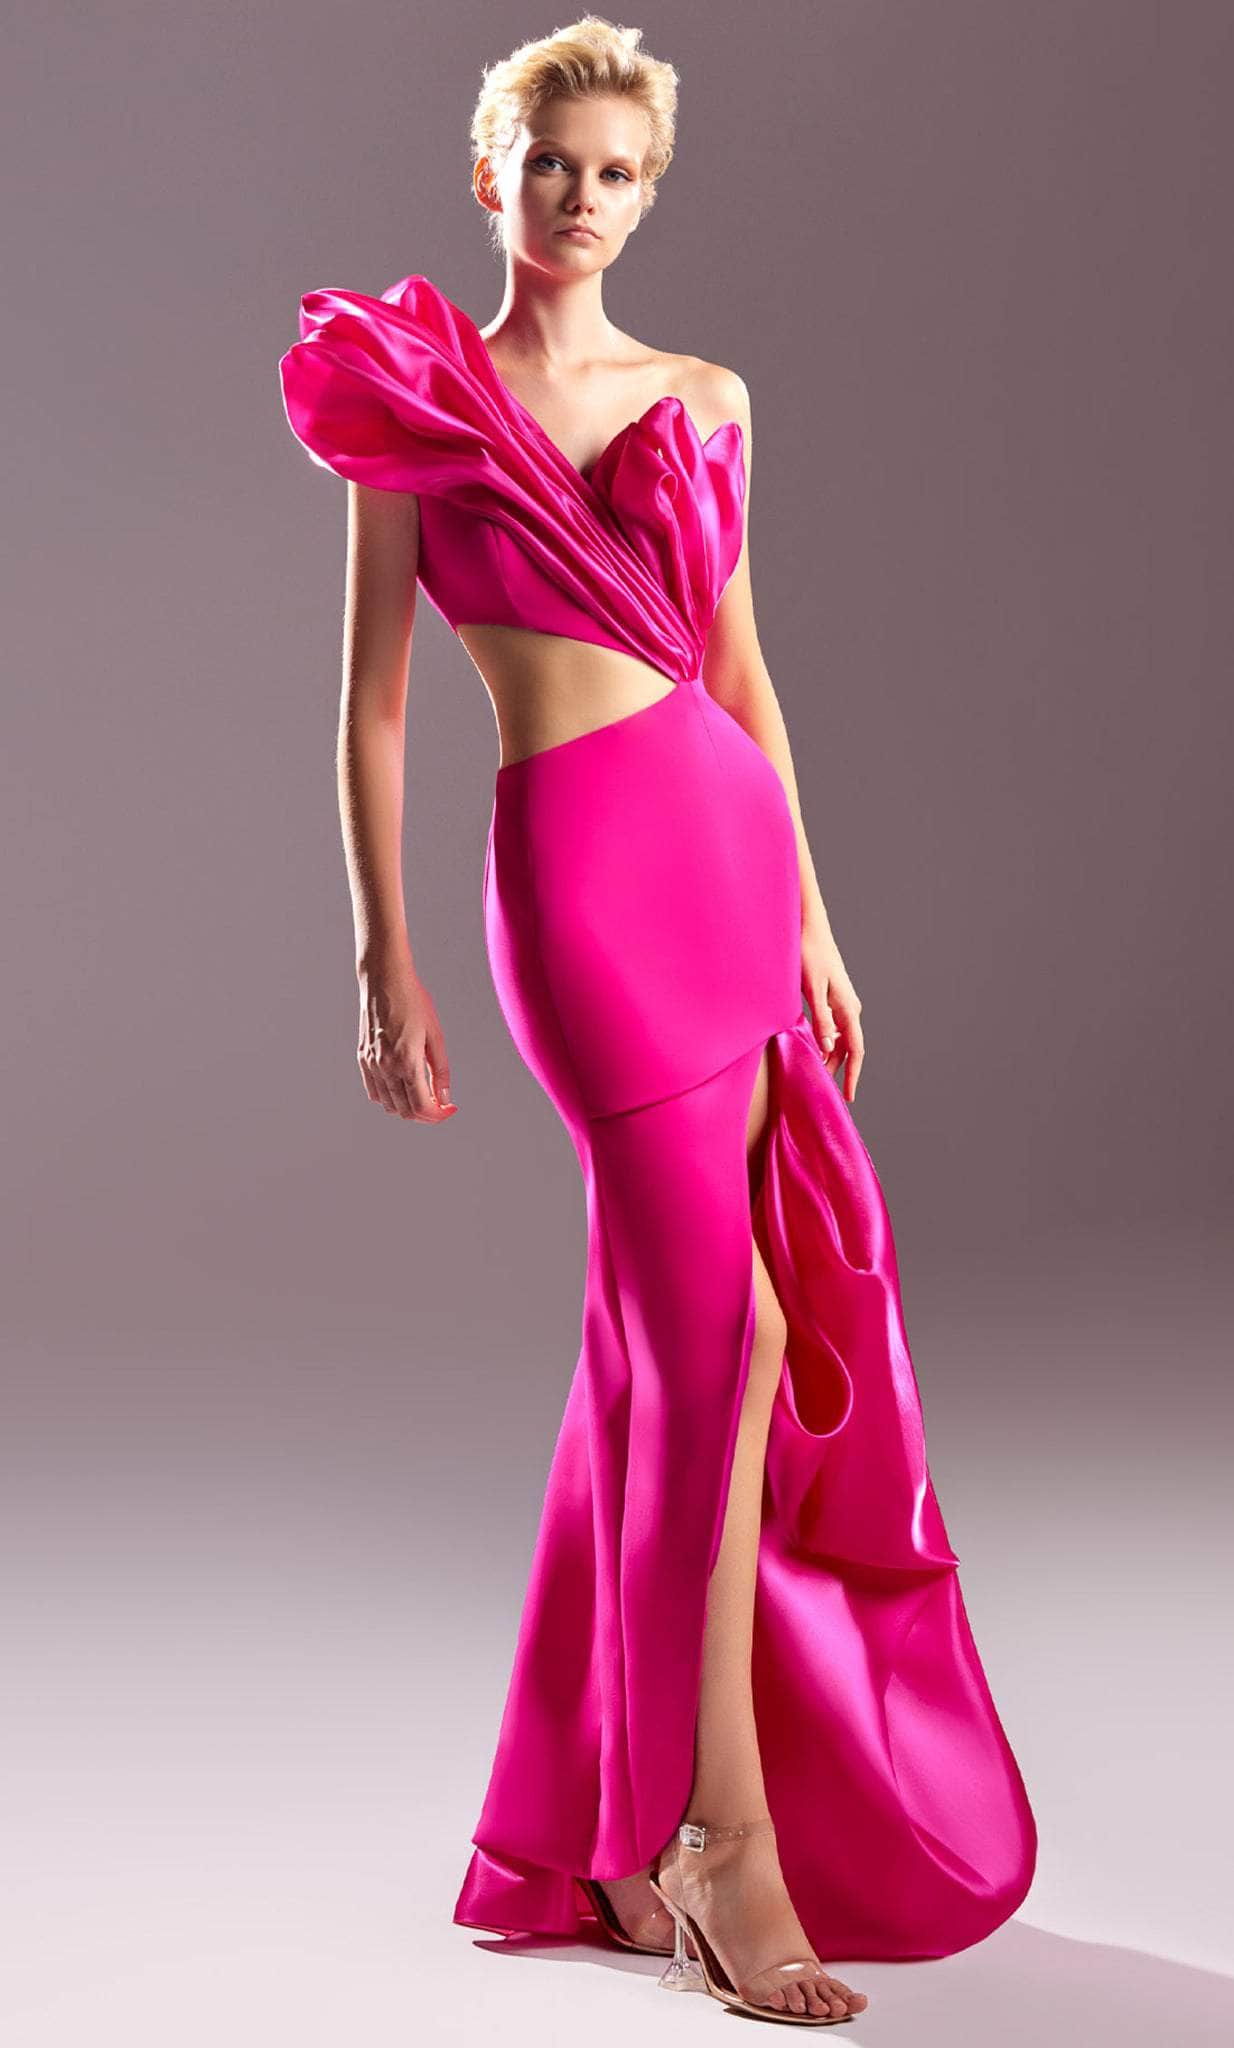 MNM COUTURE G1538 - One-Sleeve Side Cut-Out Prom Dress Prom Dresses 0 / Fuchsia